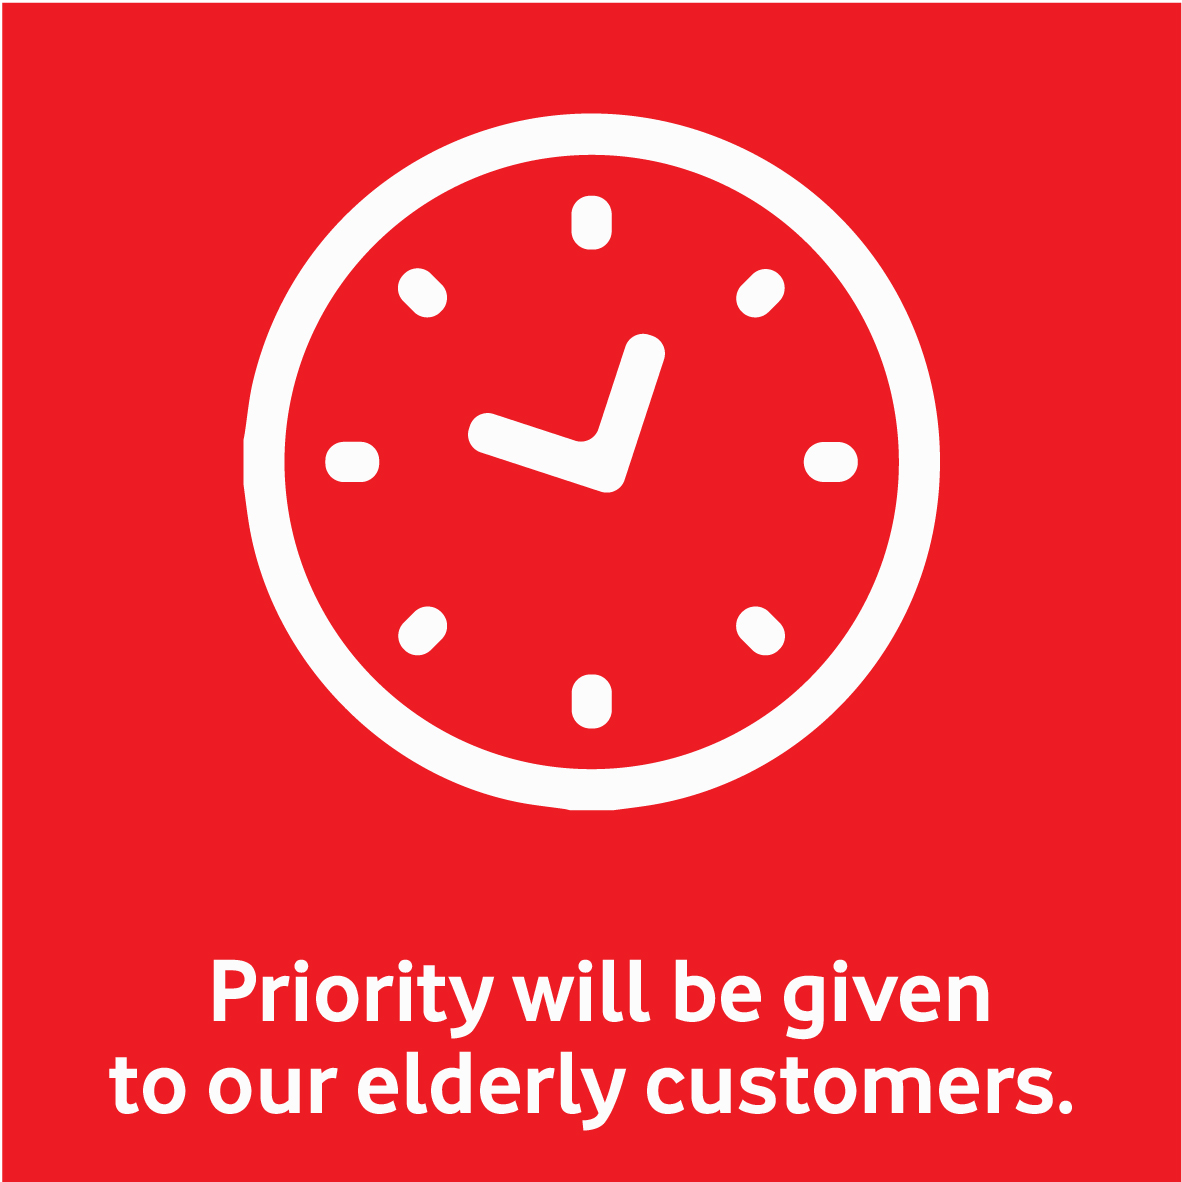 Icon explaining that priority will be given to elderly customers